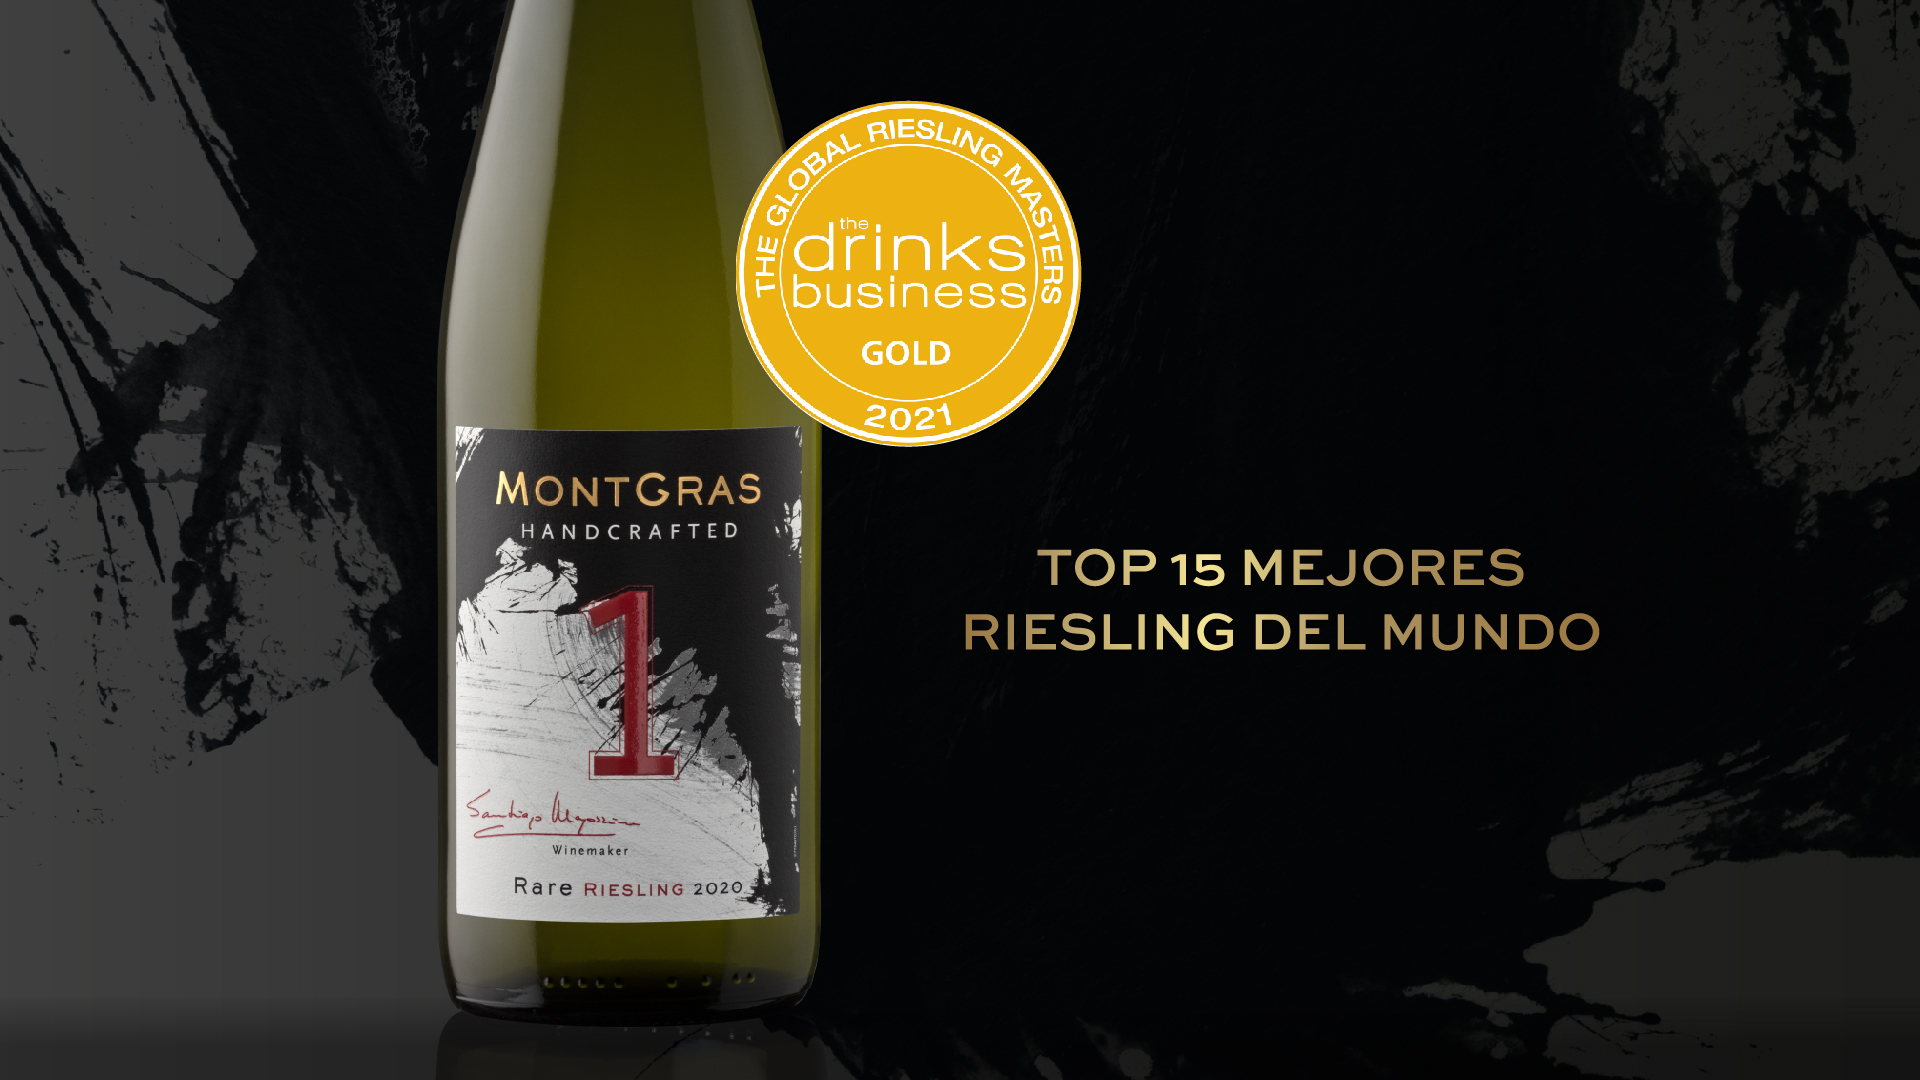 You are currently viewing MONTGRAS HANDCRAFTED RIESLING 2020 IS IN THE “TOP 15 BEST RIESLINGS IN THE WORLD”!